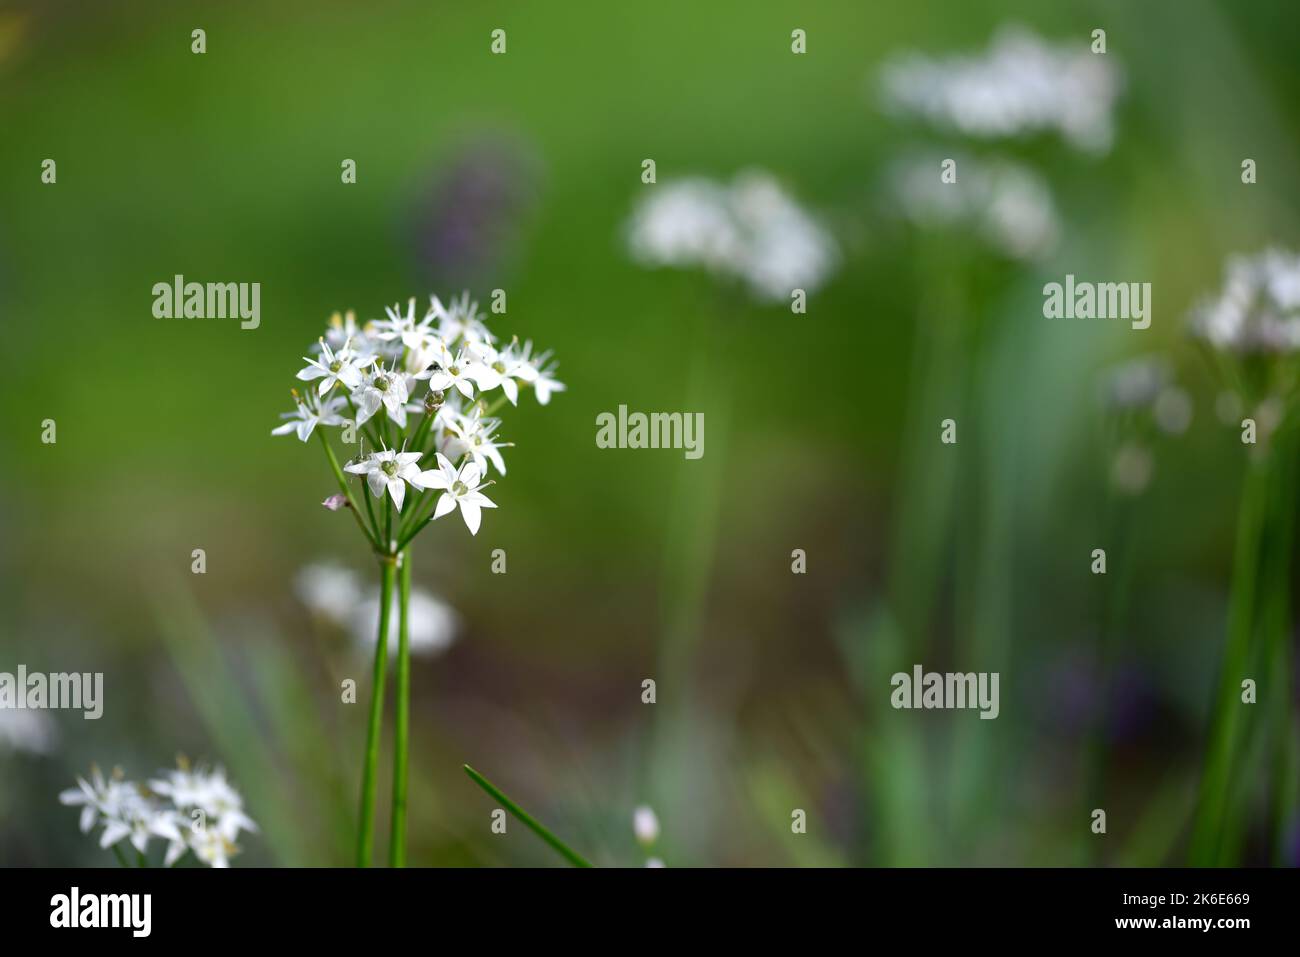 White flowering Chinese chives at dusk Stock Photo